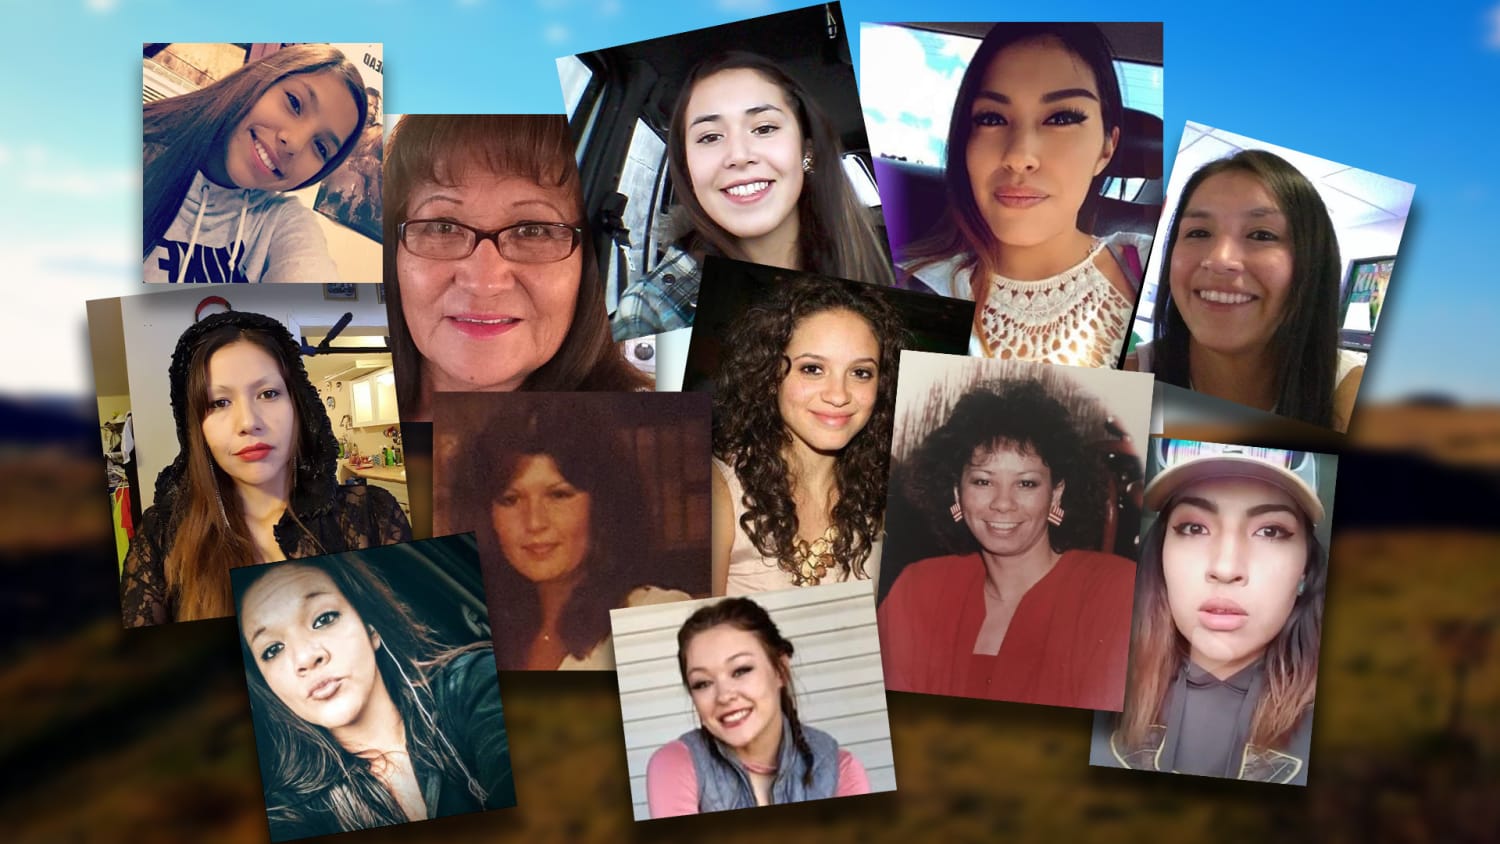 Missing and Murdered Indigenous Women featured in Dateline NBCs Missing in America and Cold Case Spotlight pic